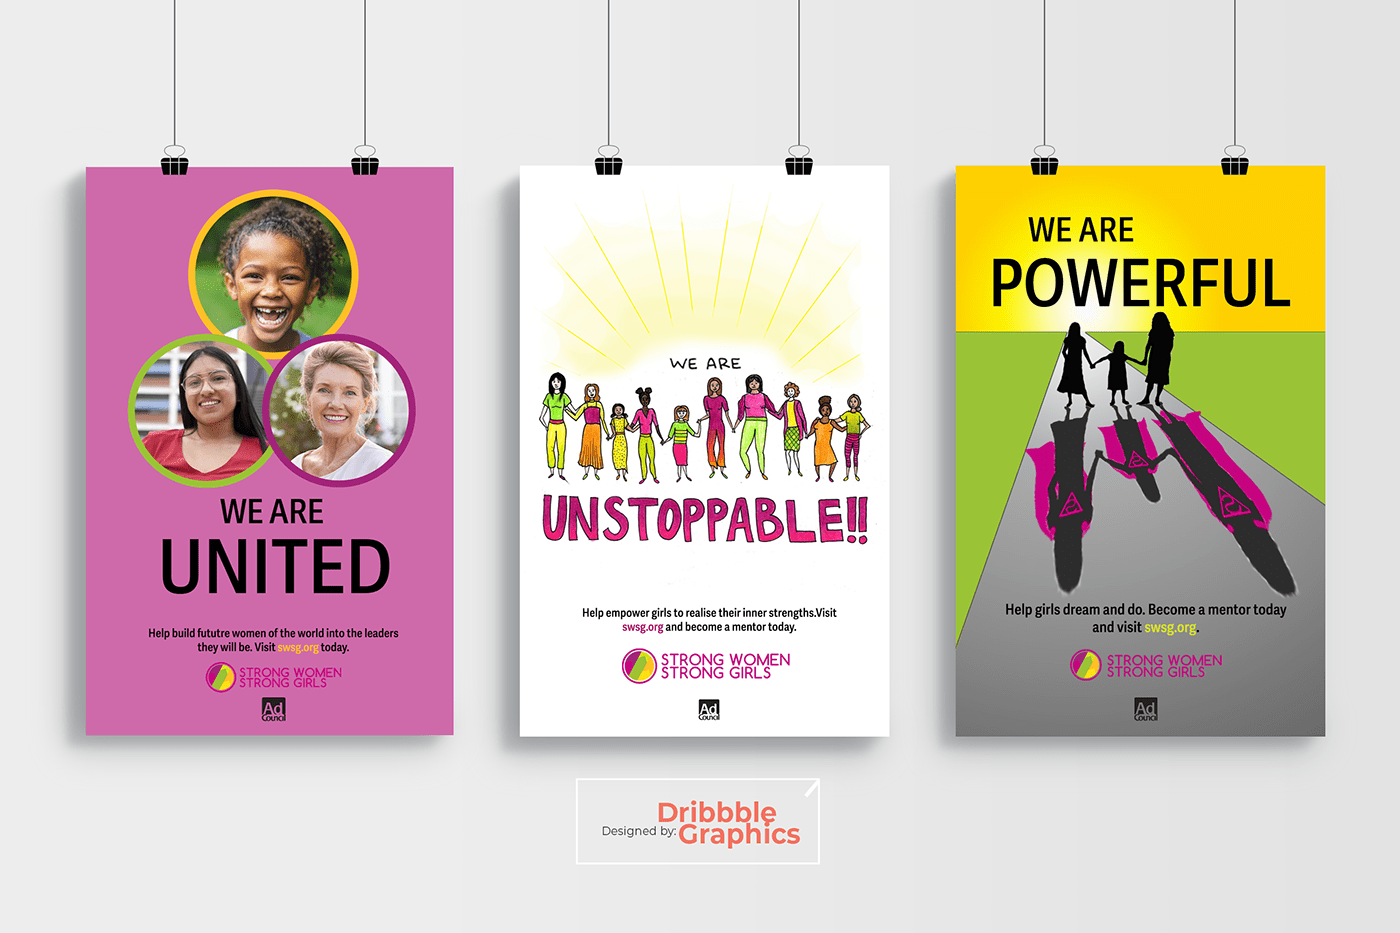 campaign empowerment females girls Powerful together united unstoppable women young women